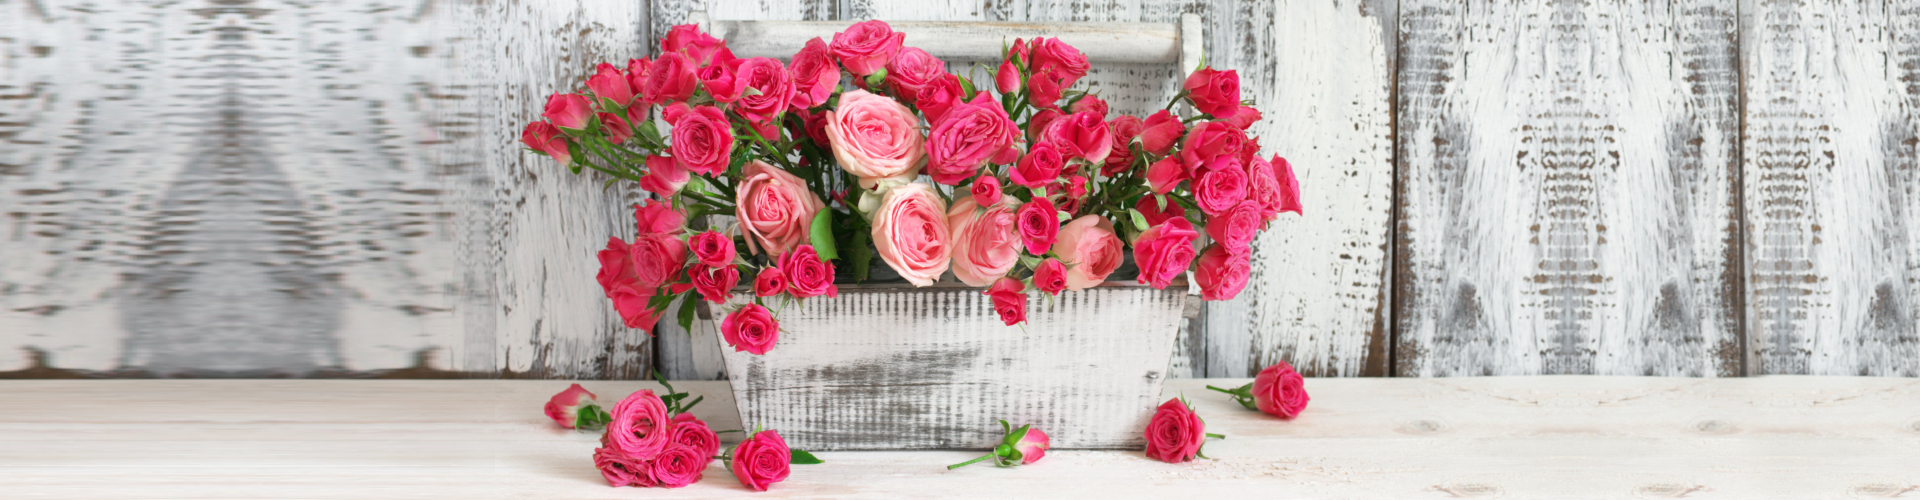 Bouquet of pink roses in box